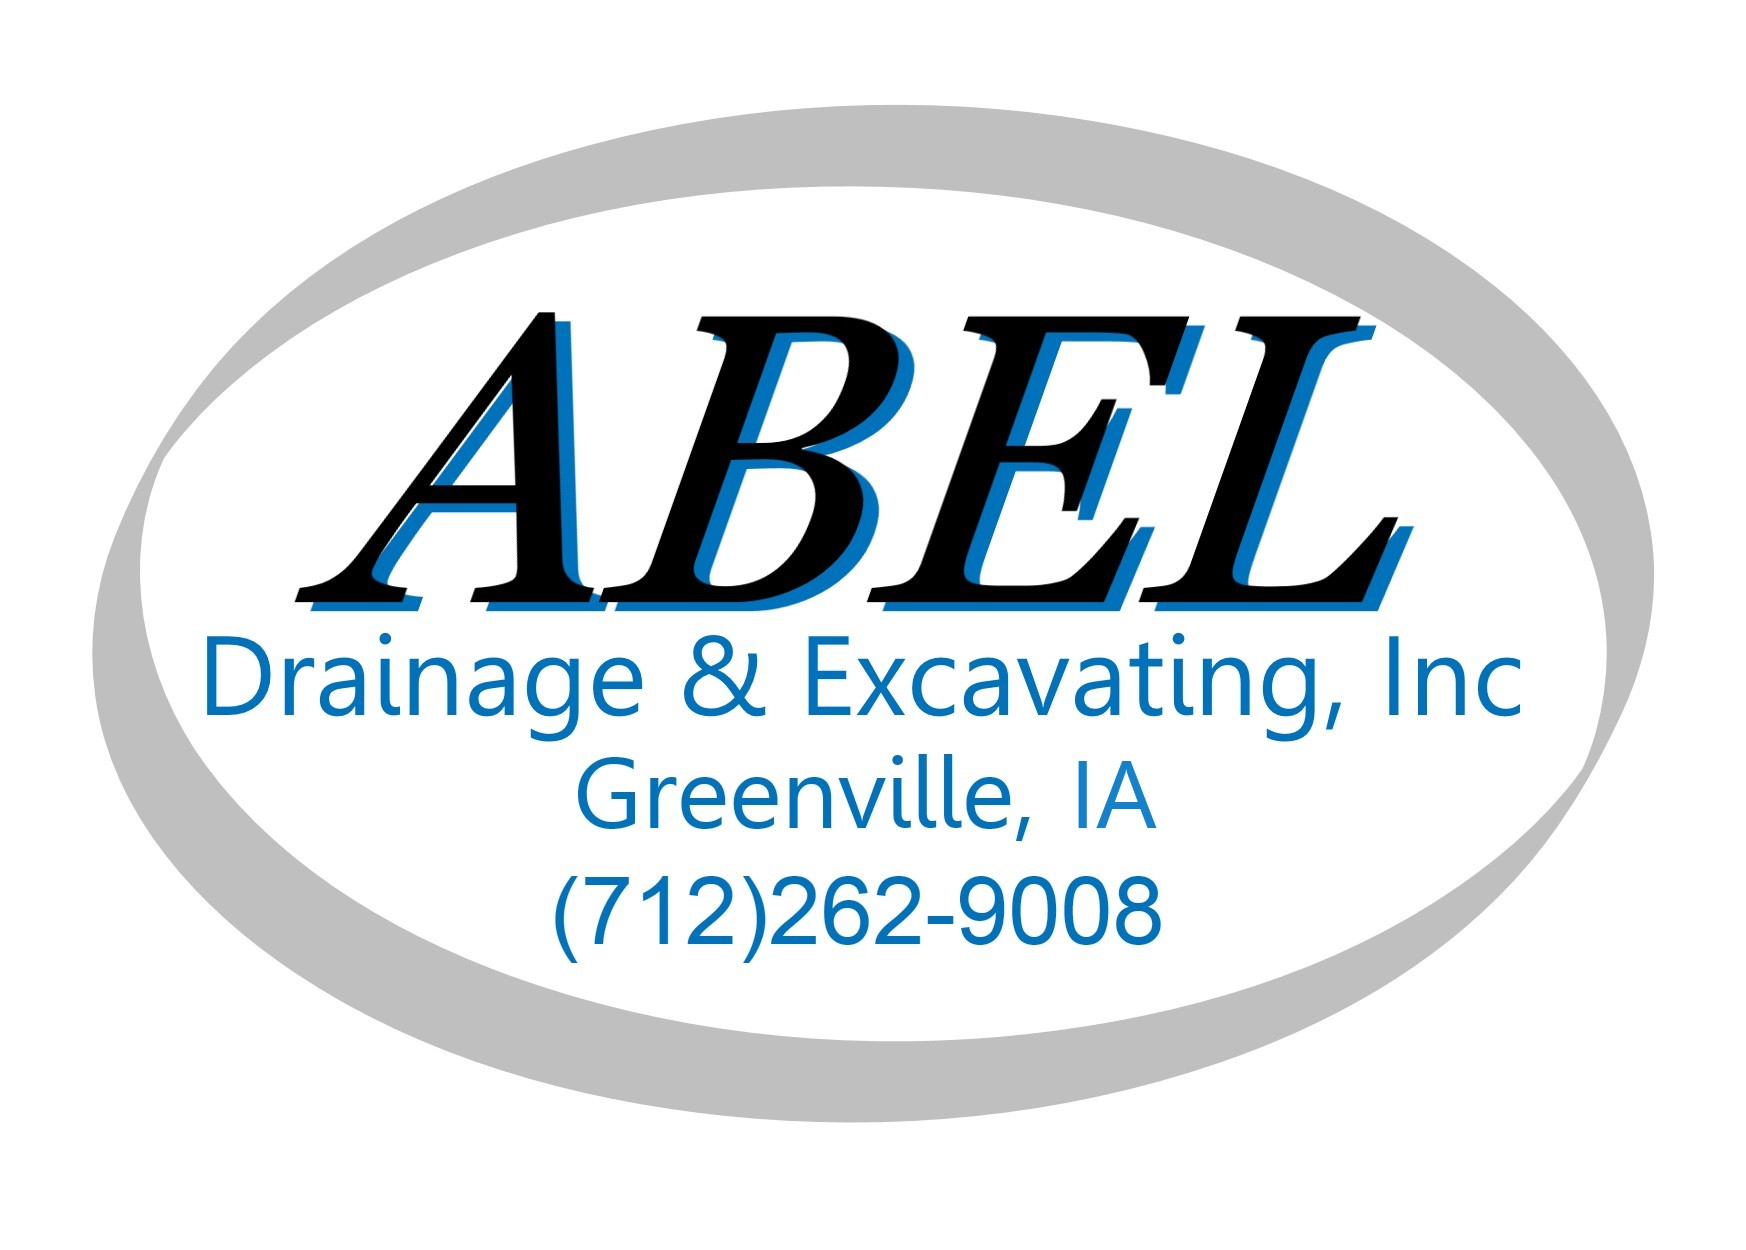 Top-Notch Drainage and Excavation Services